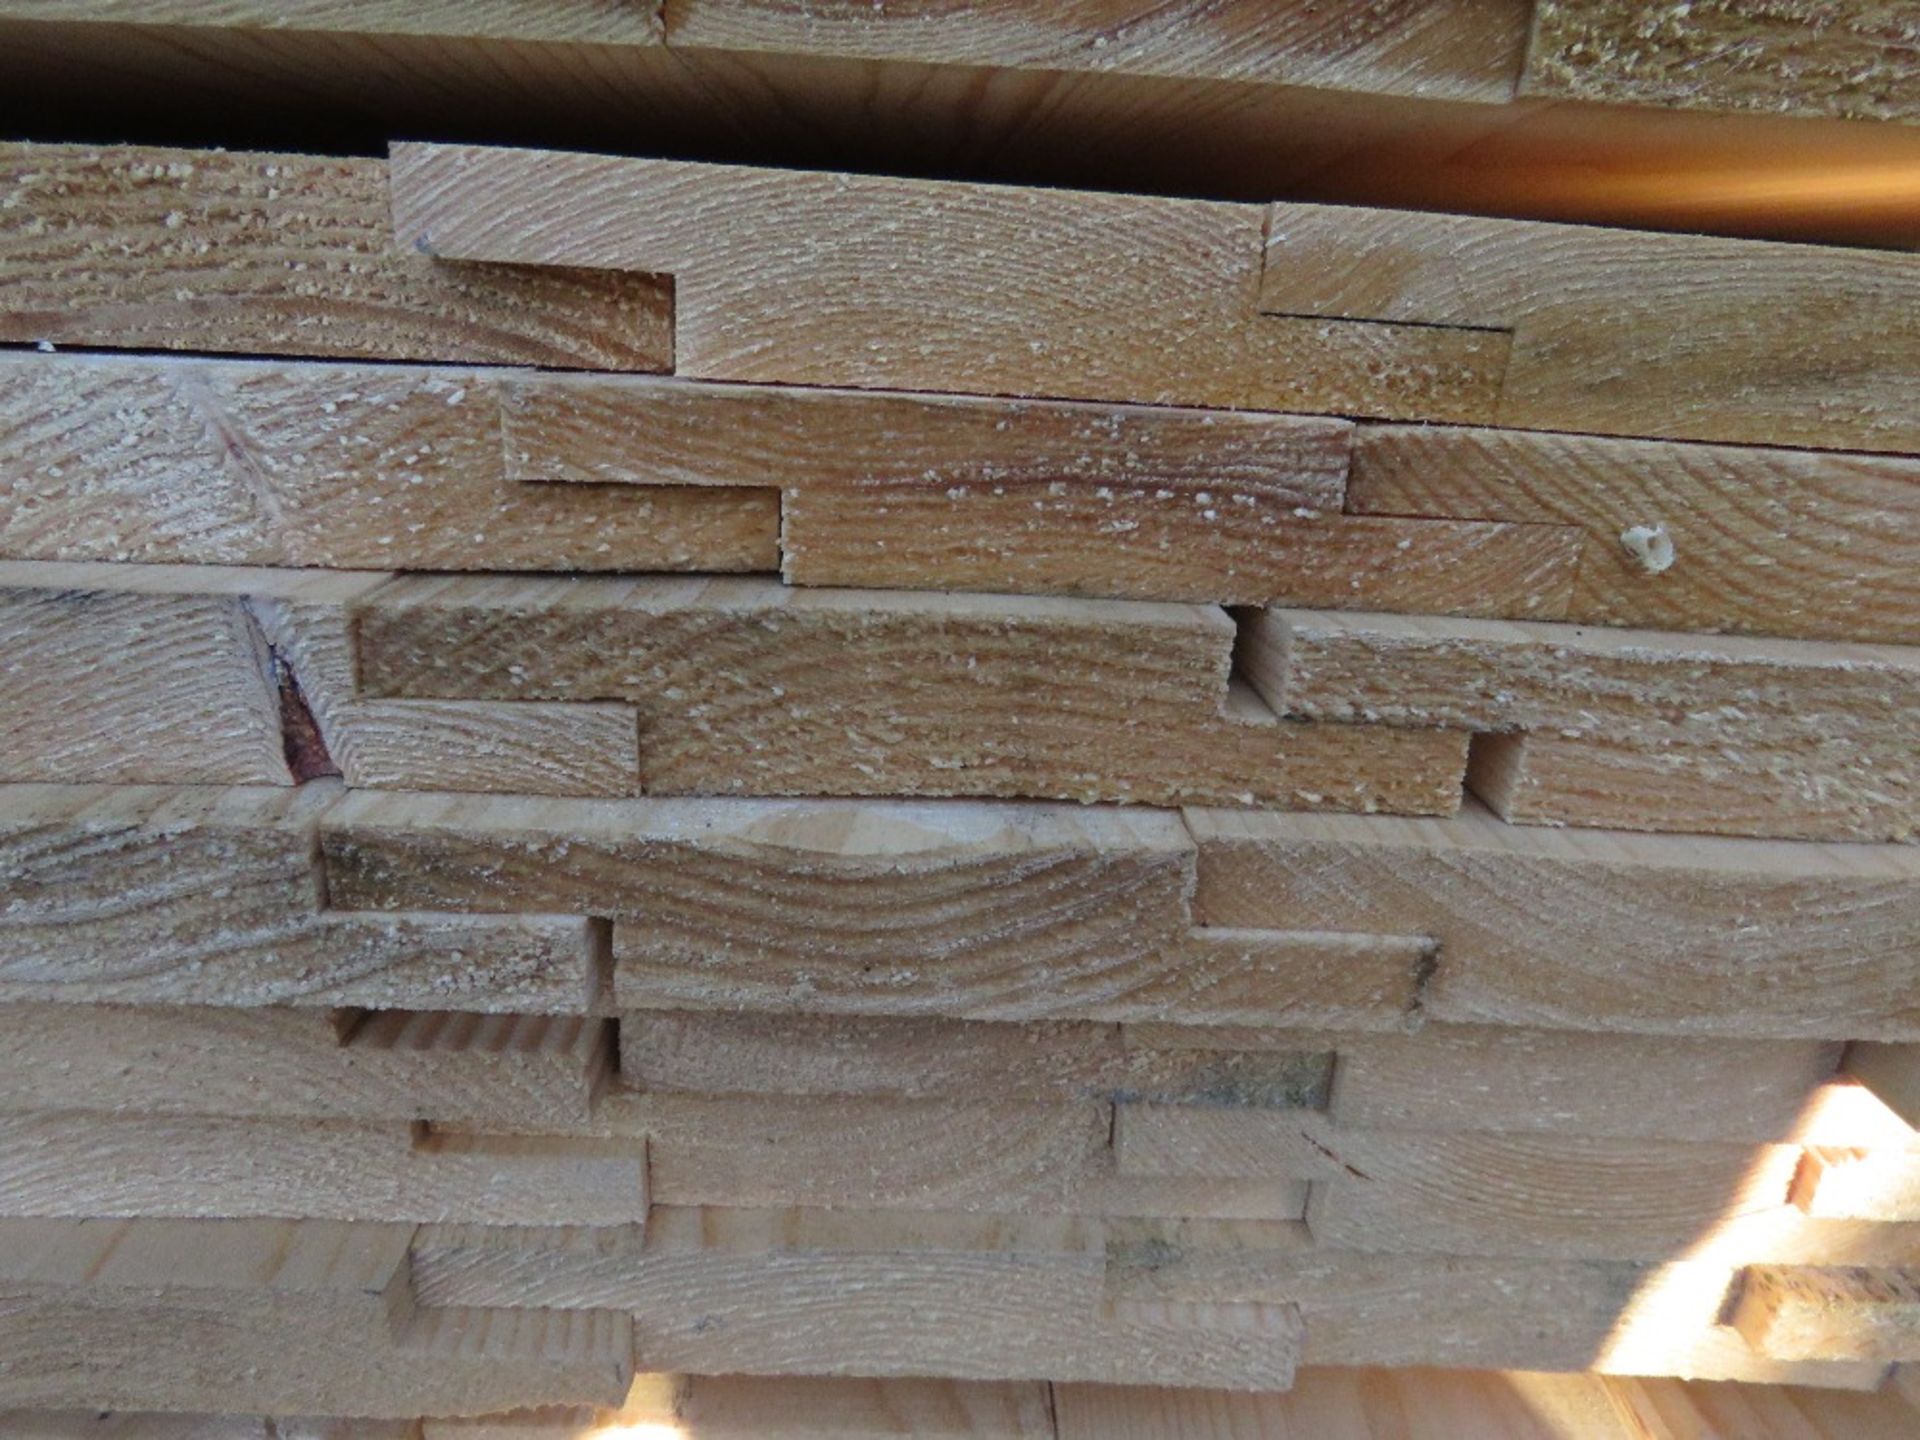 PACK OF UNTREATED INTERLOCKING CLADDING BOARDS 1.83M LENGTH X 150MM X 25MM APPROX. - Image 3 of 4